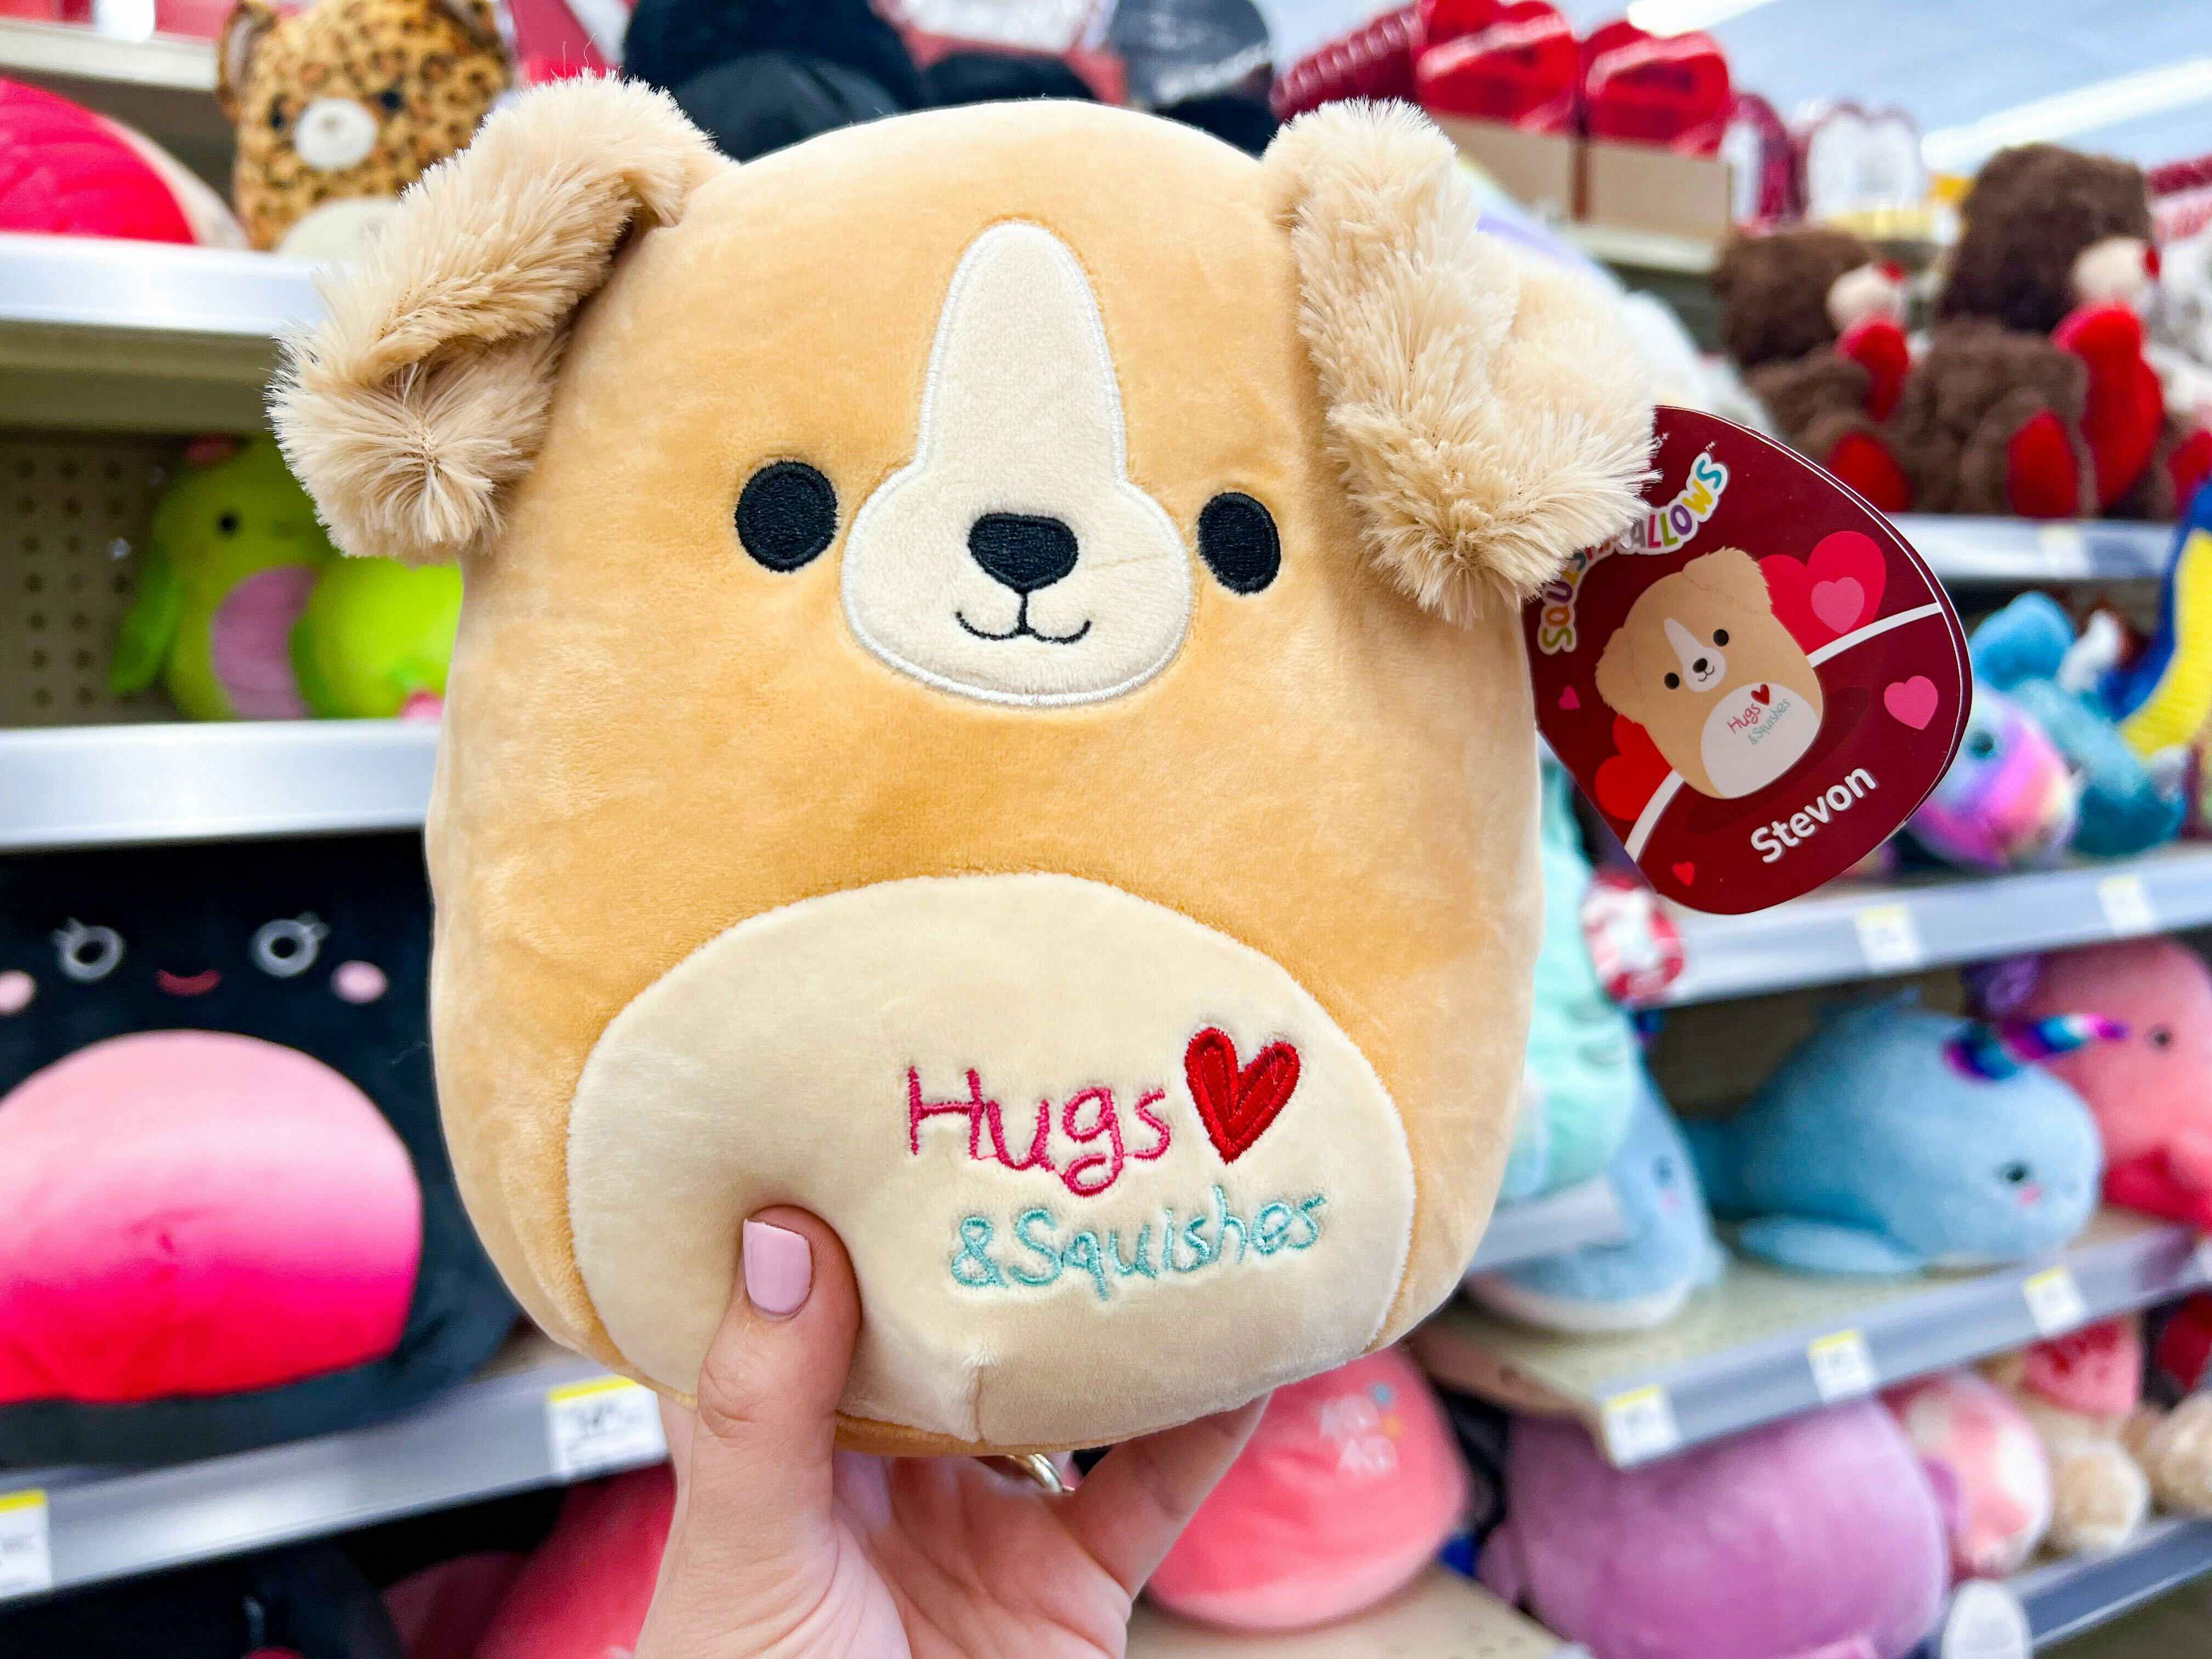 Someone holding up a Stevon Valentine's Day Squishmallow in Walgreens